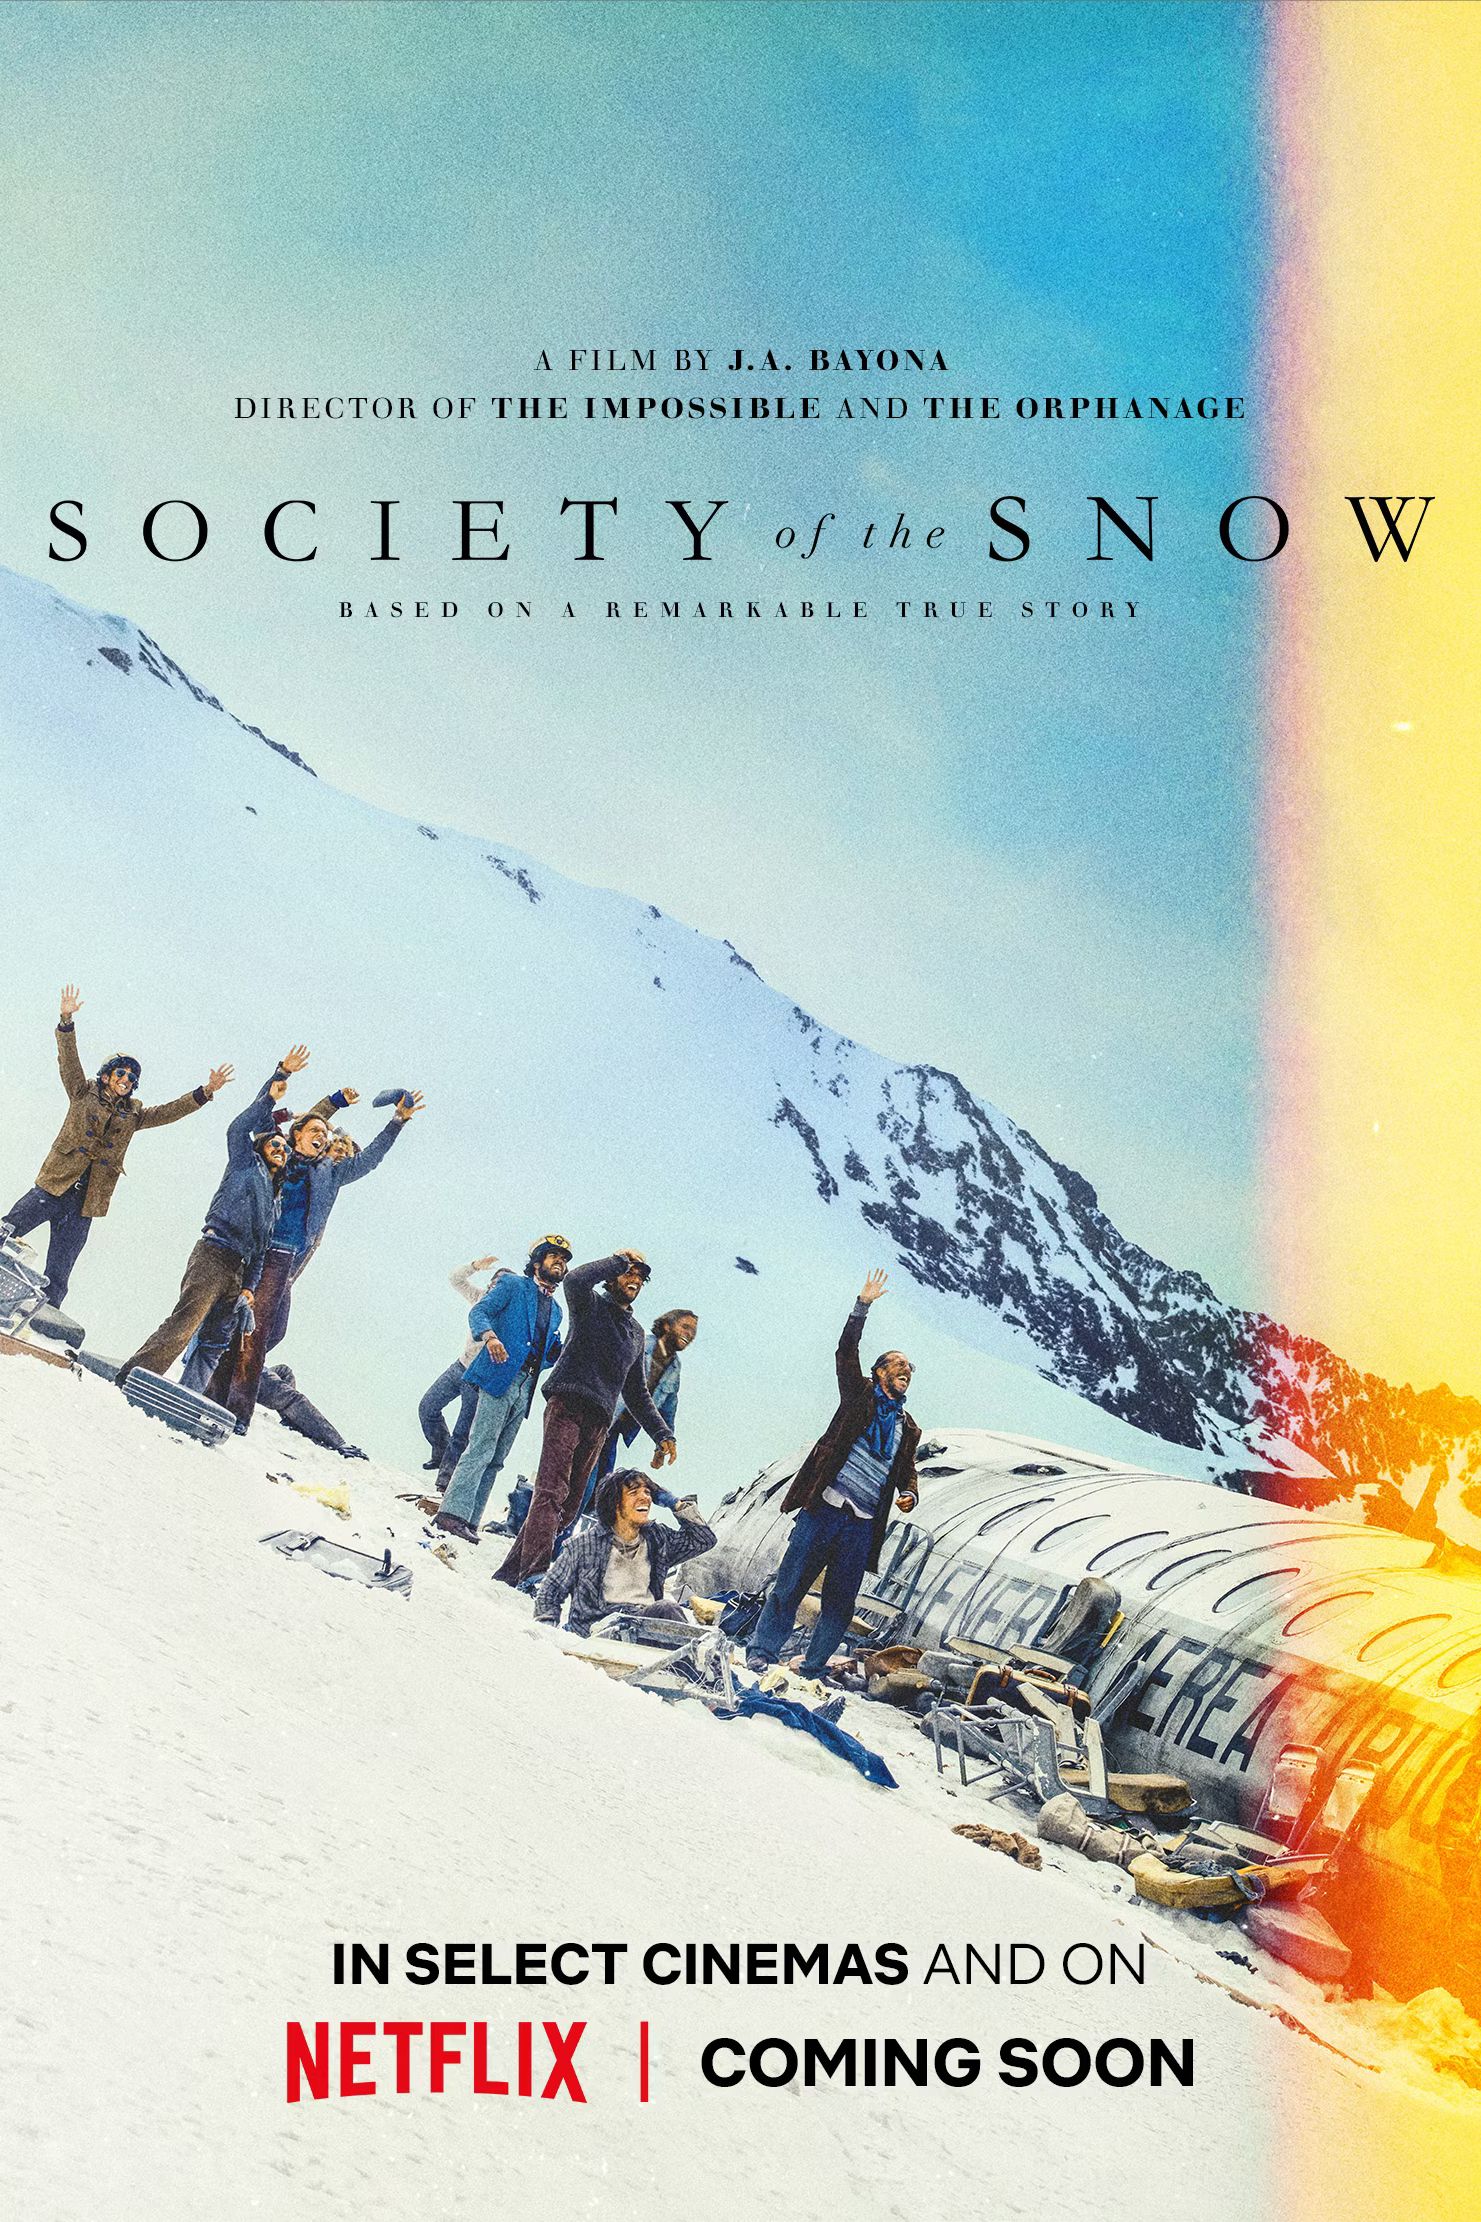 How Accurate is Society of the Snow? The True Story vs. the Movie